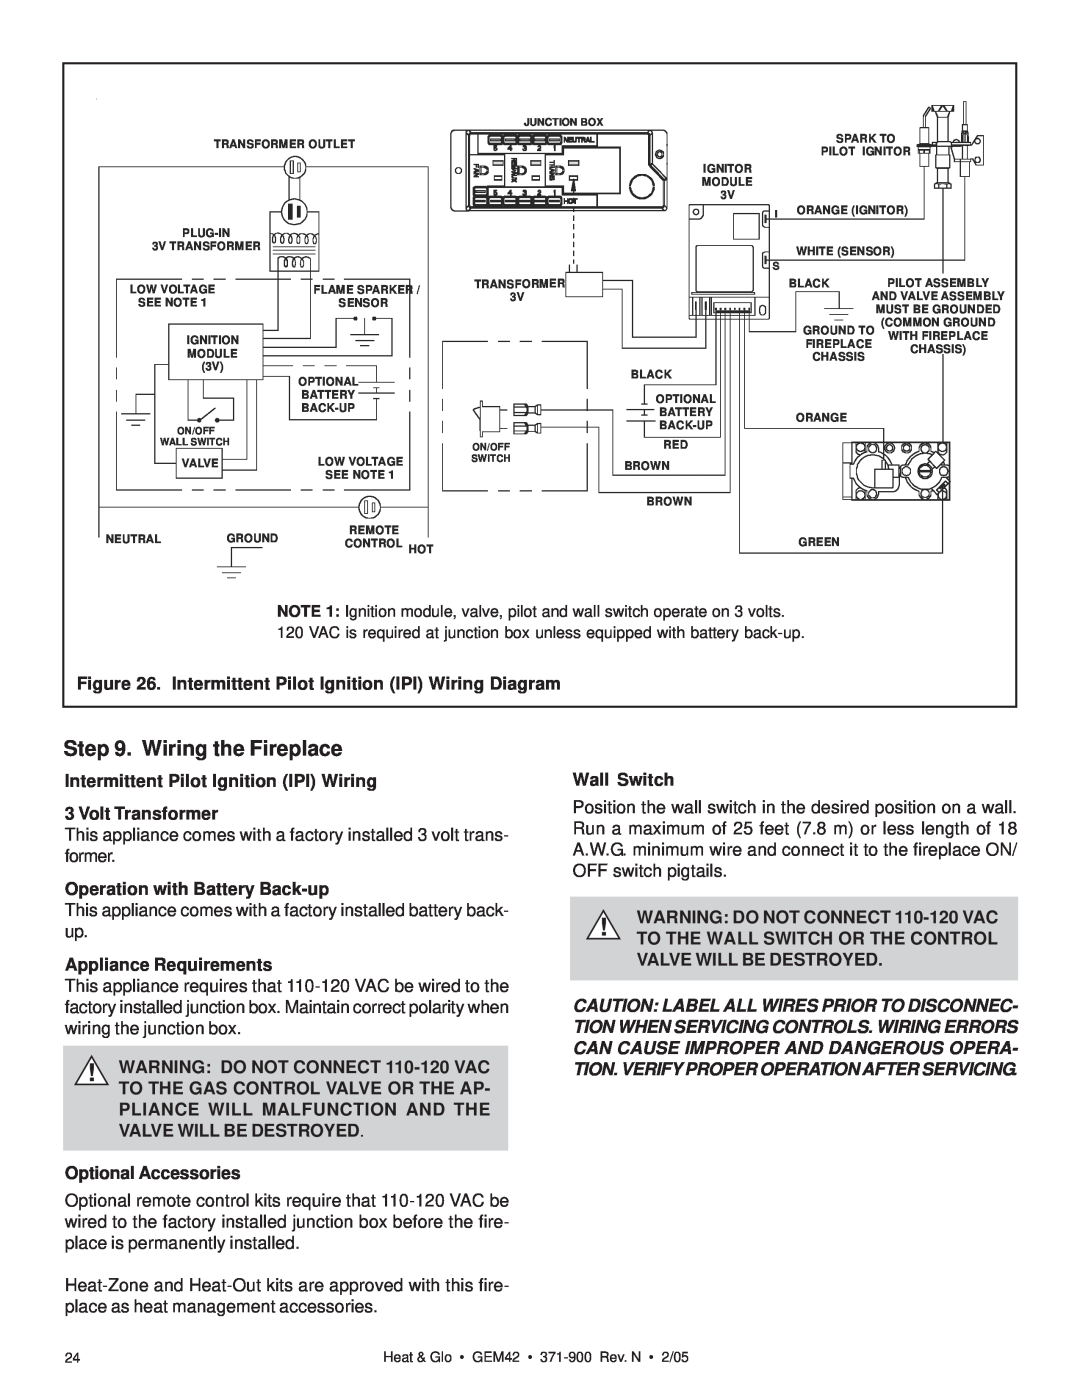 Heat & Glo LifeStyle GEM42 Wiring the Fireplace, Intermittent Pilot Ignition IPI Wiring Diagram, Appliance Requirements 